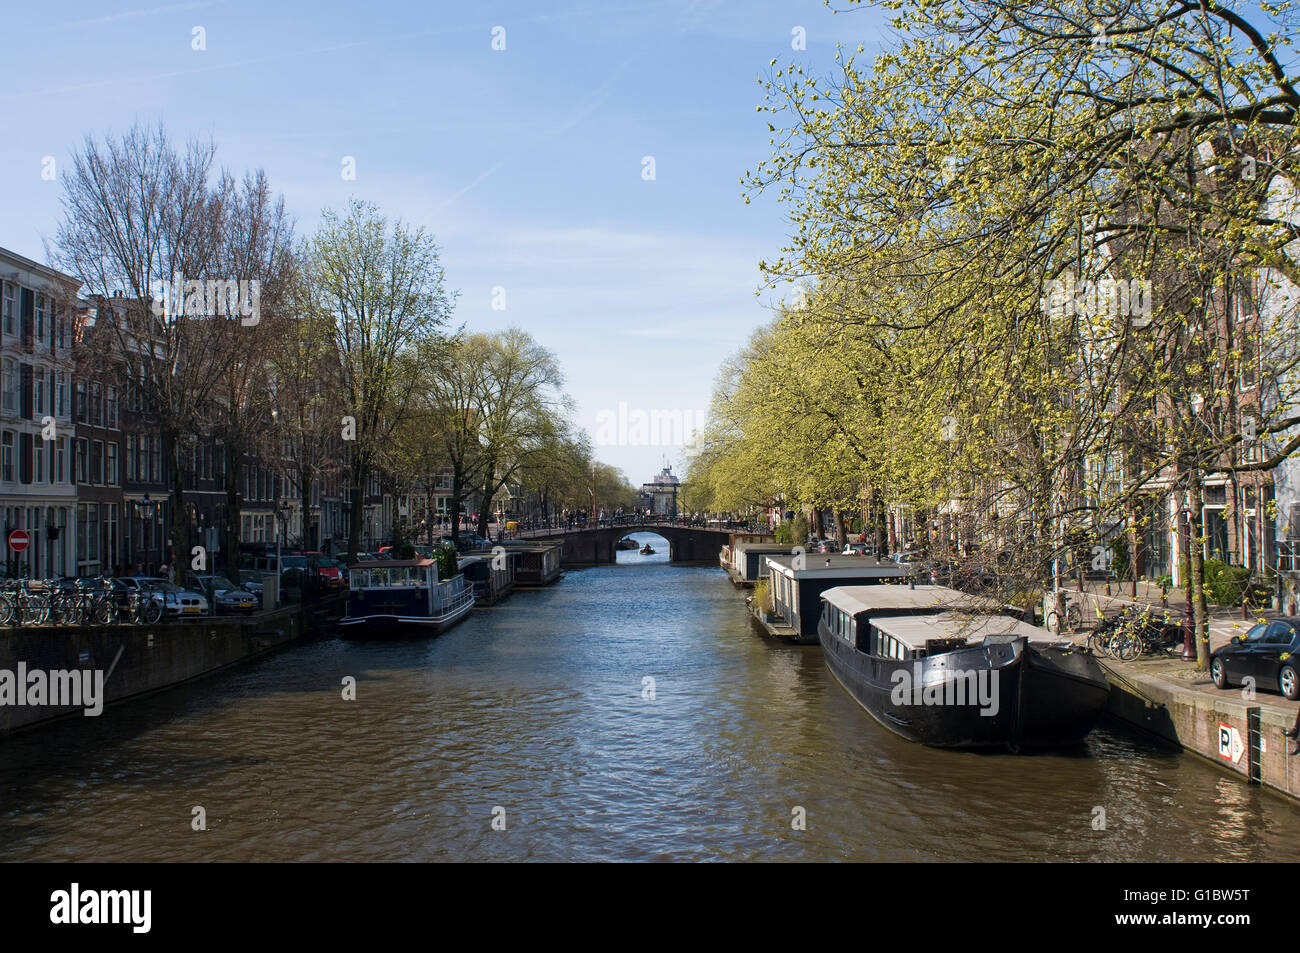 A canal in Amsterdam Netherlands Stock Photo